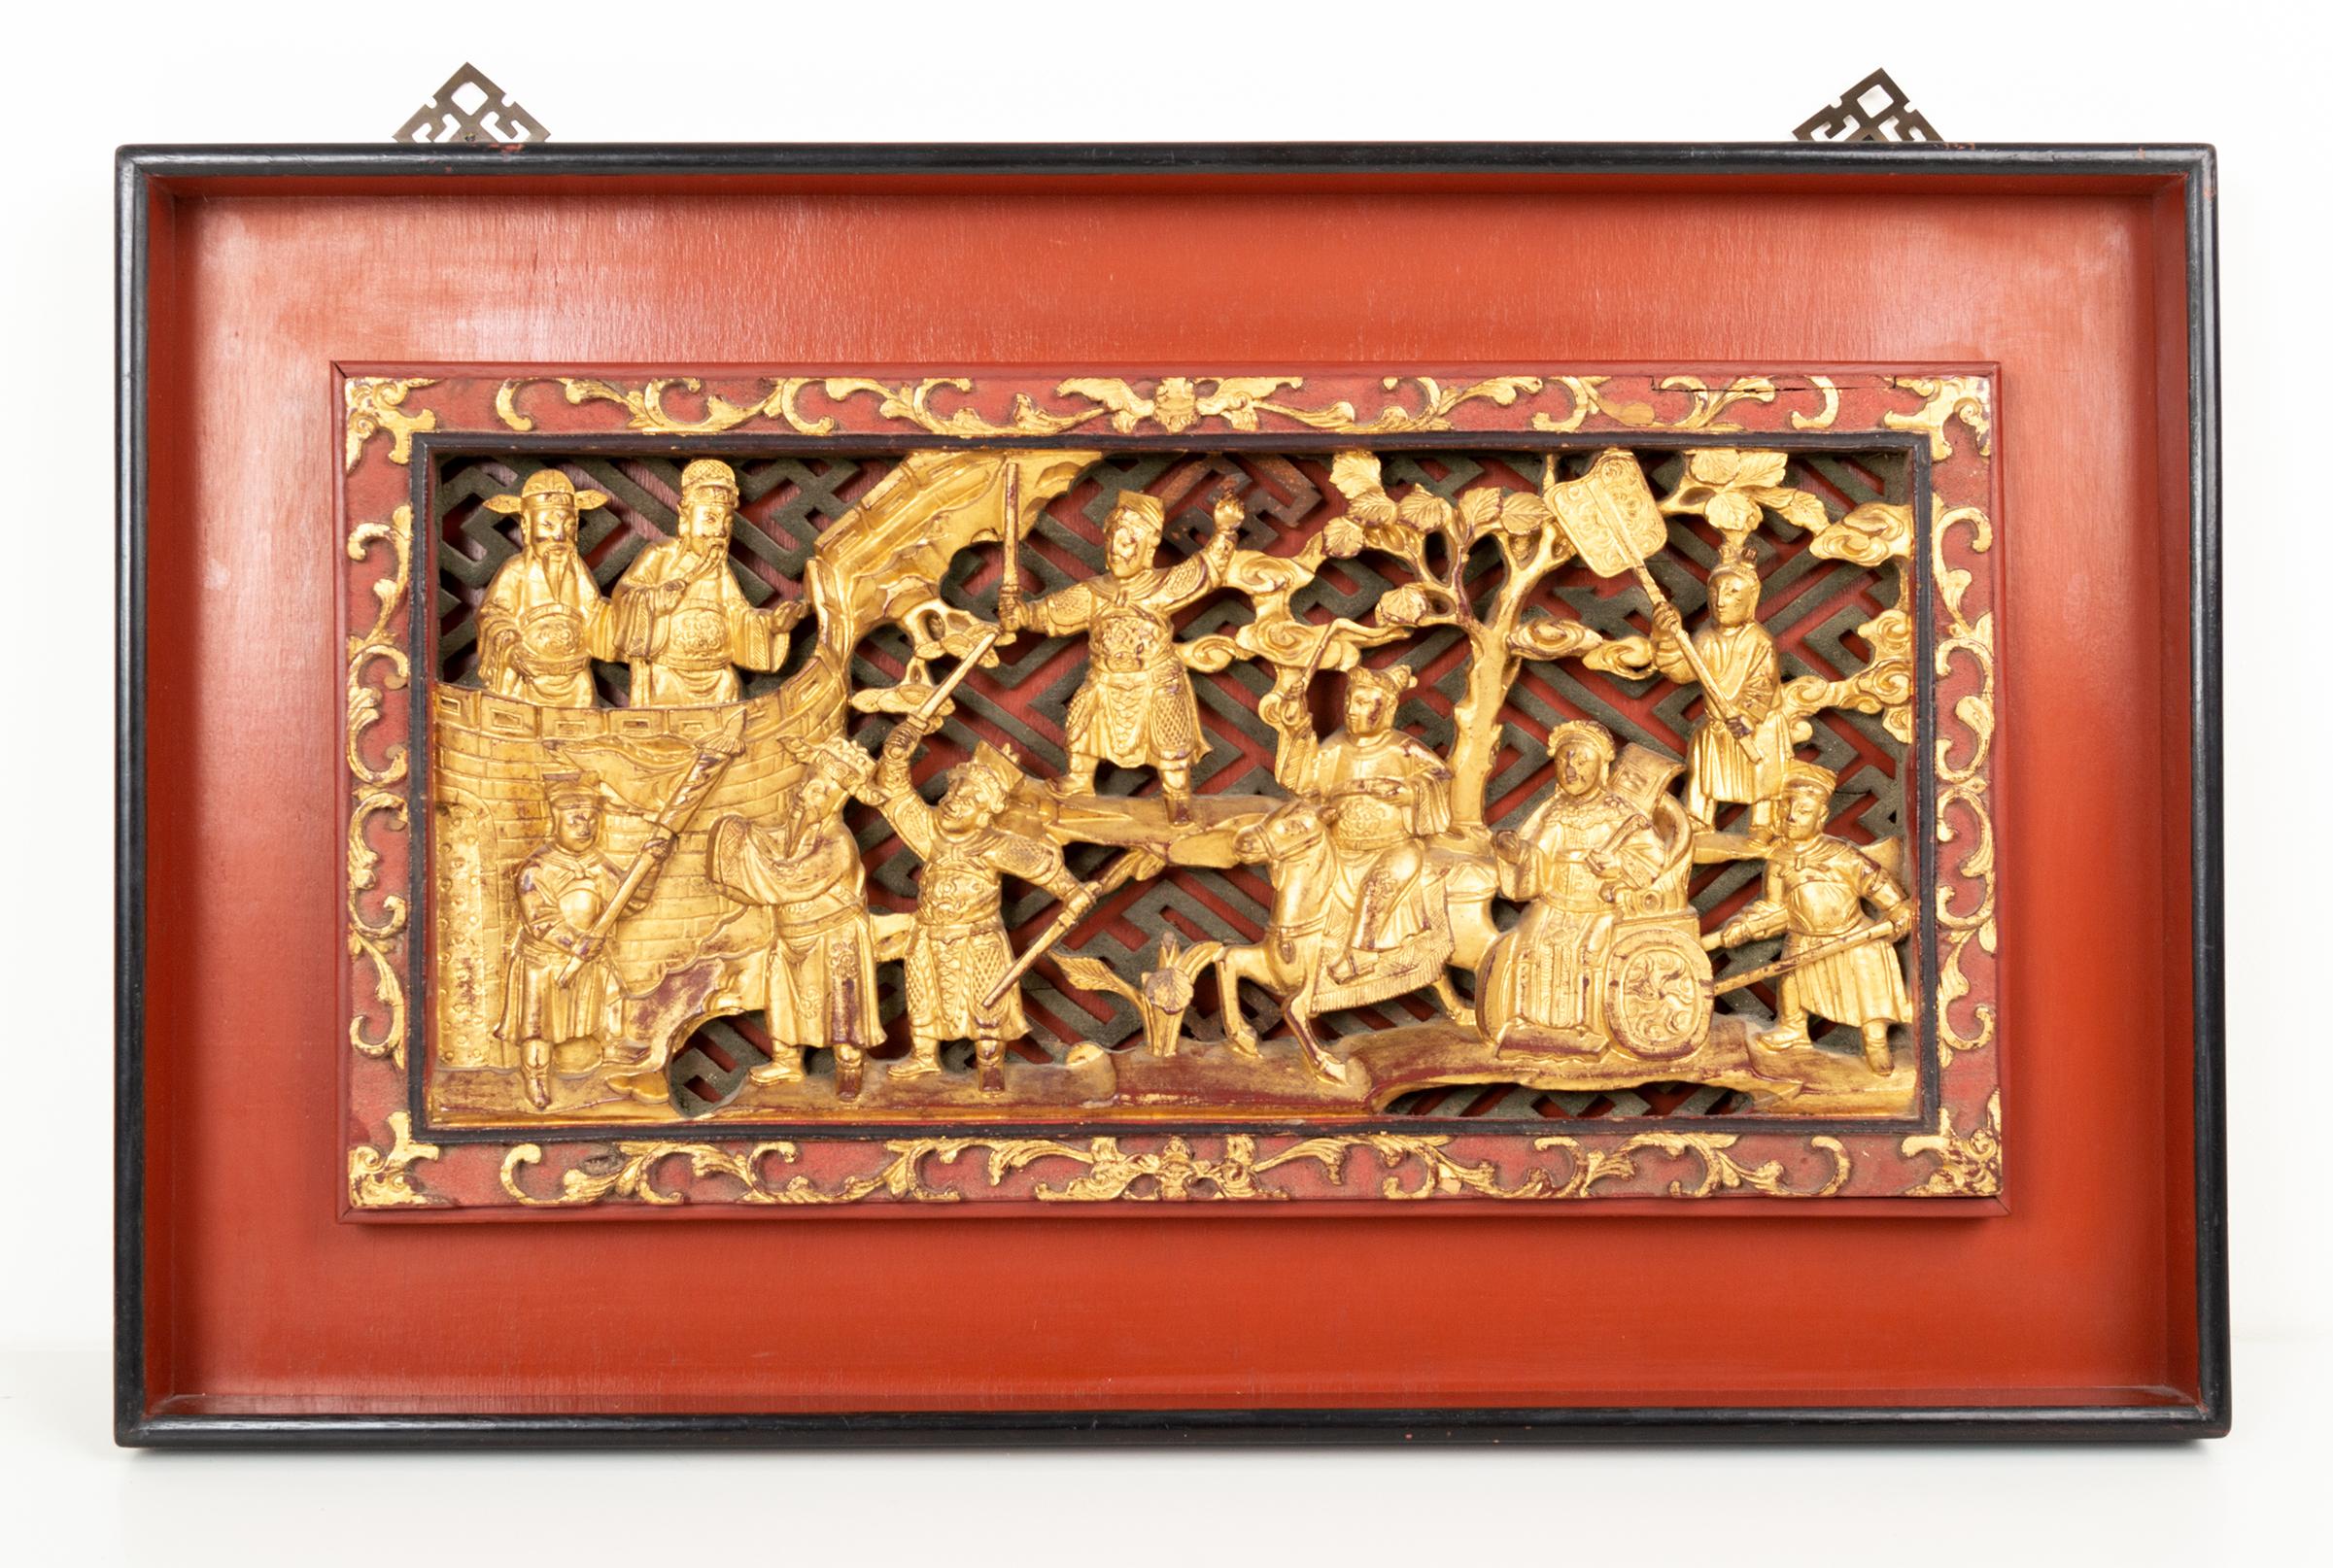 A superb pair of elaborately carved Chinese gilded panels, depicting a warrior scene. China, C.1920
In very good condition commensurate of age, with some dust settled in the carvings and expected patina.